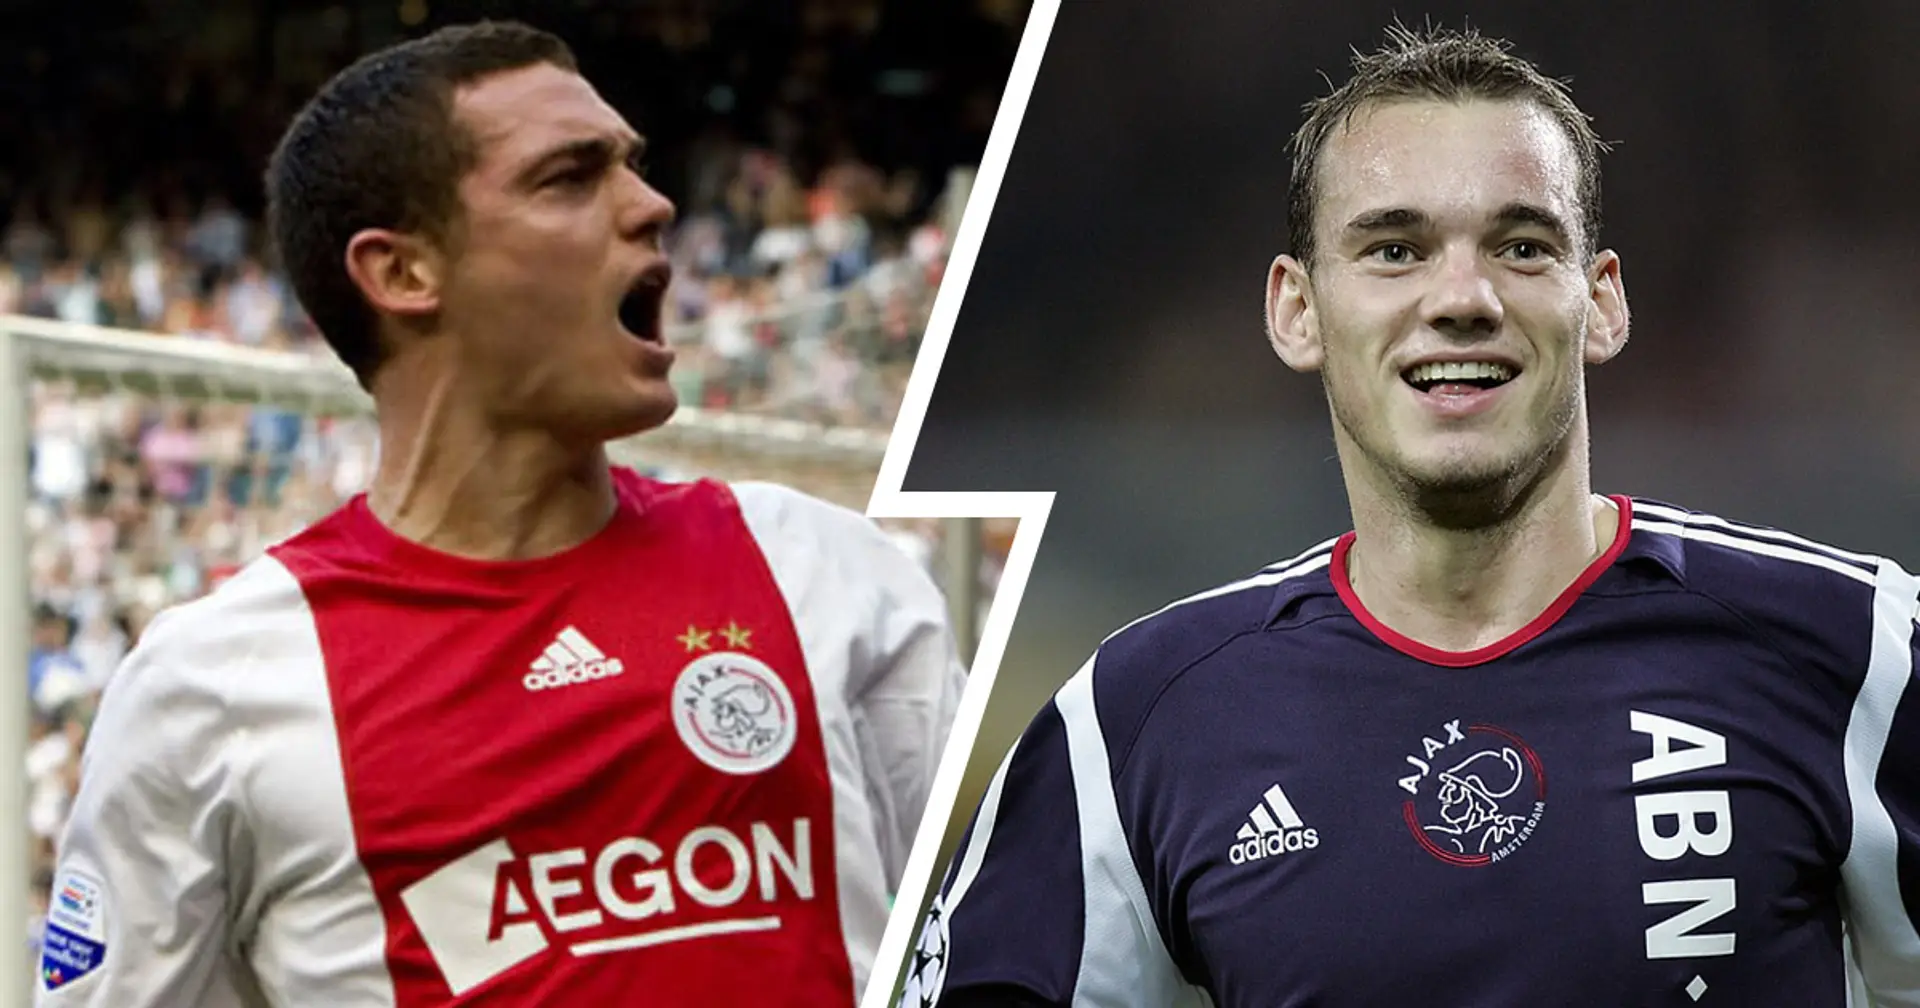 Hope for La Masia: Sneijder, Vermaelen and 2 more stars who made professional debuts under Koeman